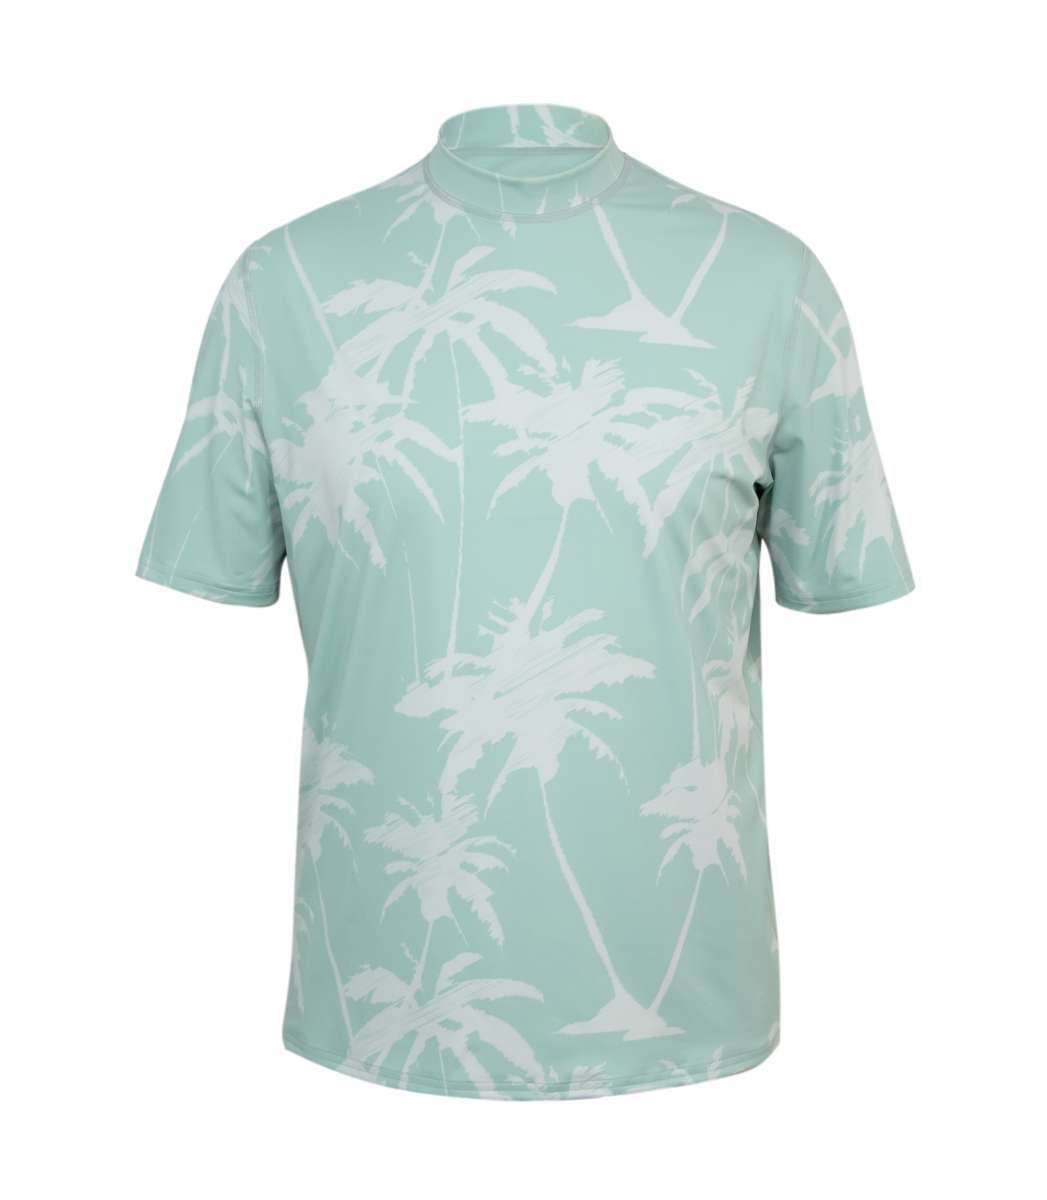 UV Shirt 'palms' front view 